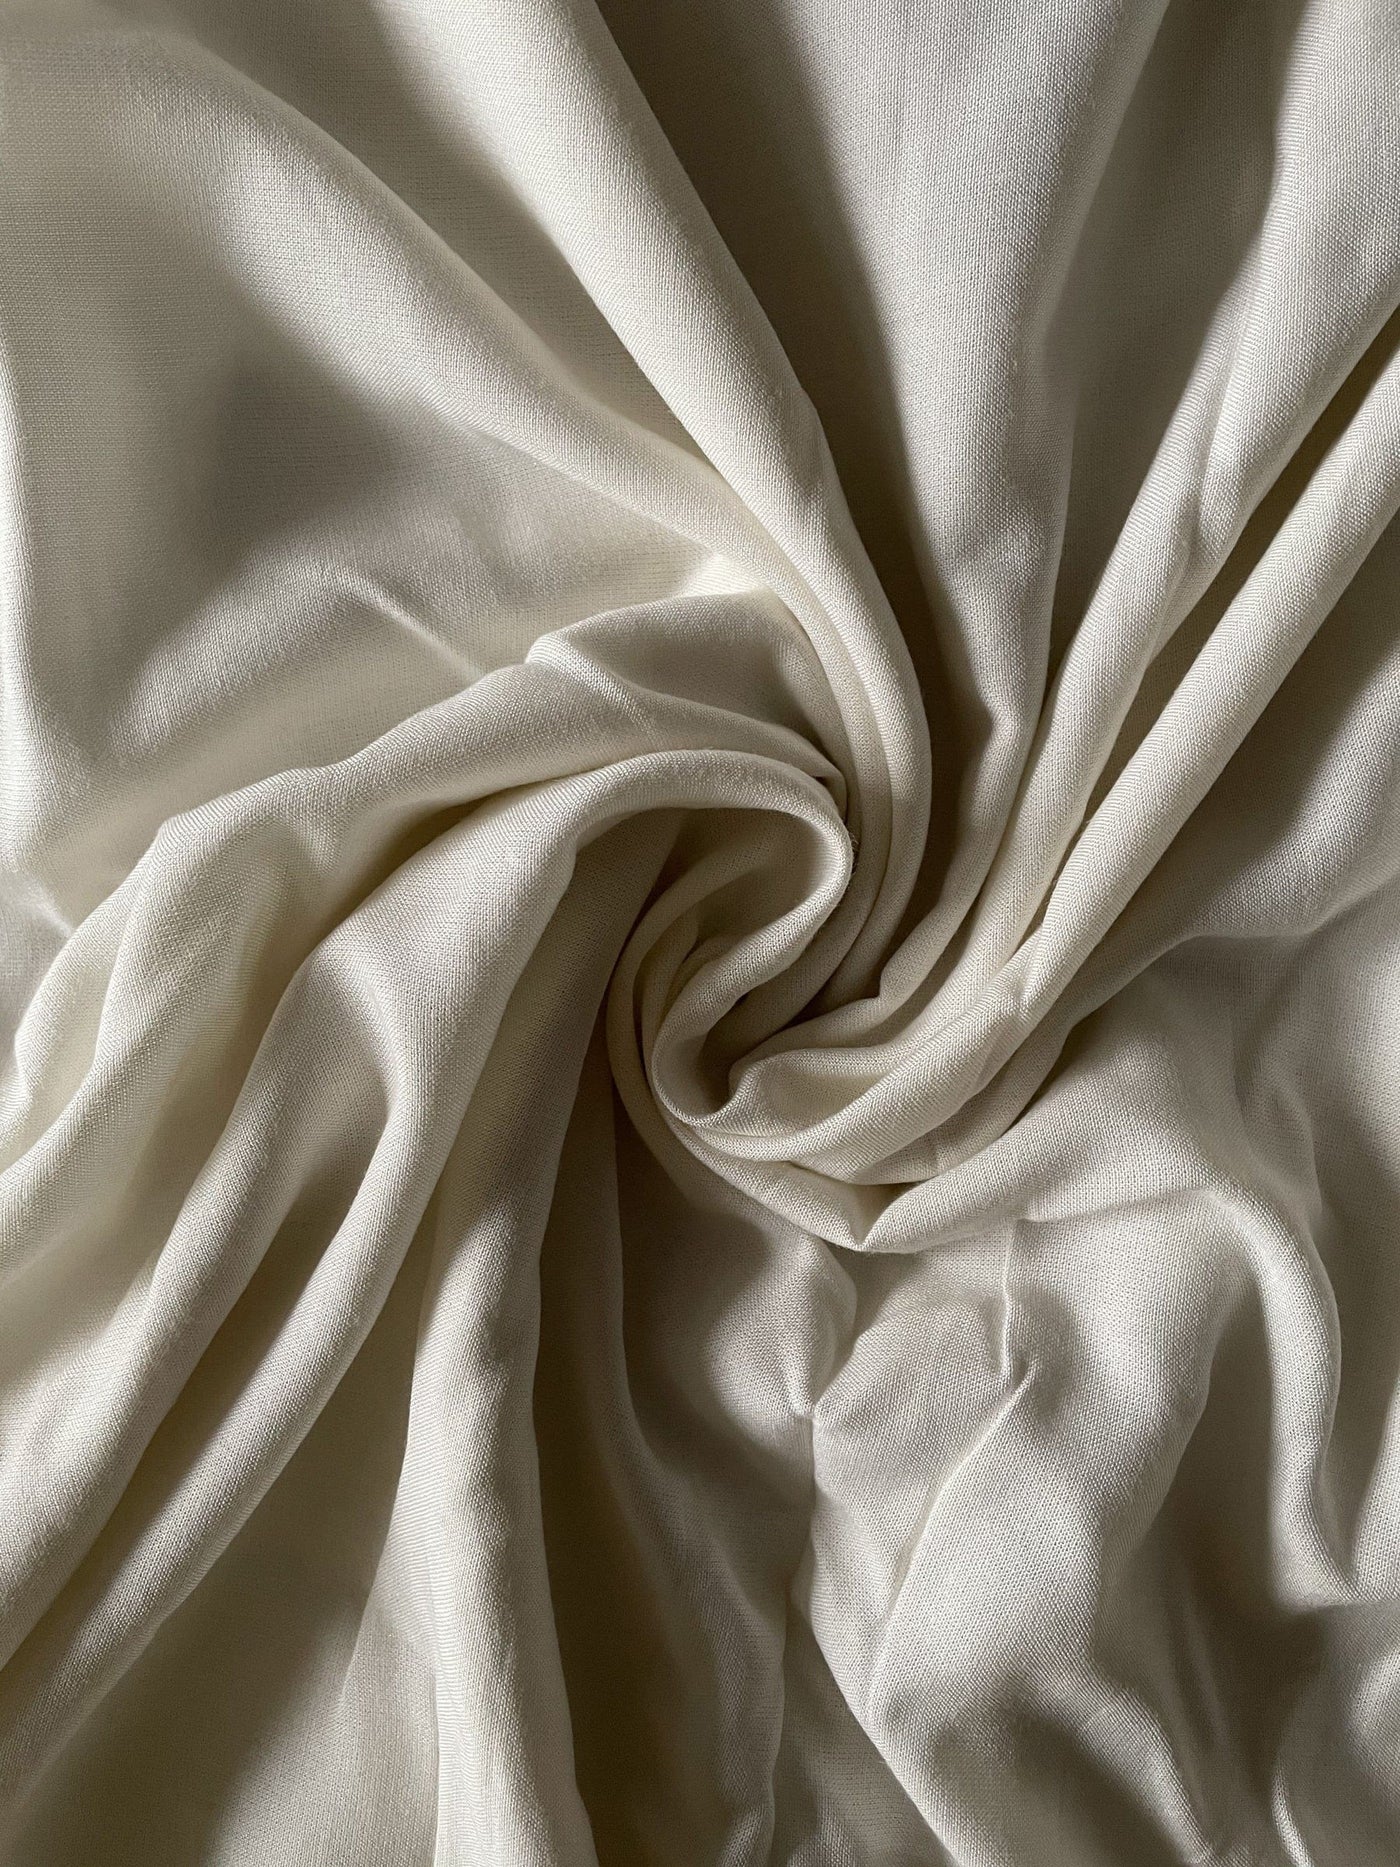 Fabric Pandit Fabric Pearl White Color Pure Rayon Fabric